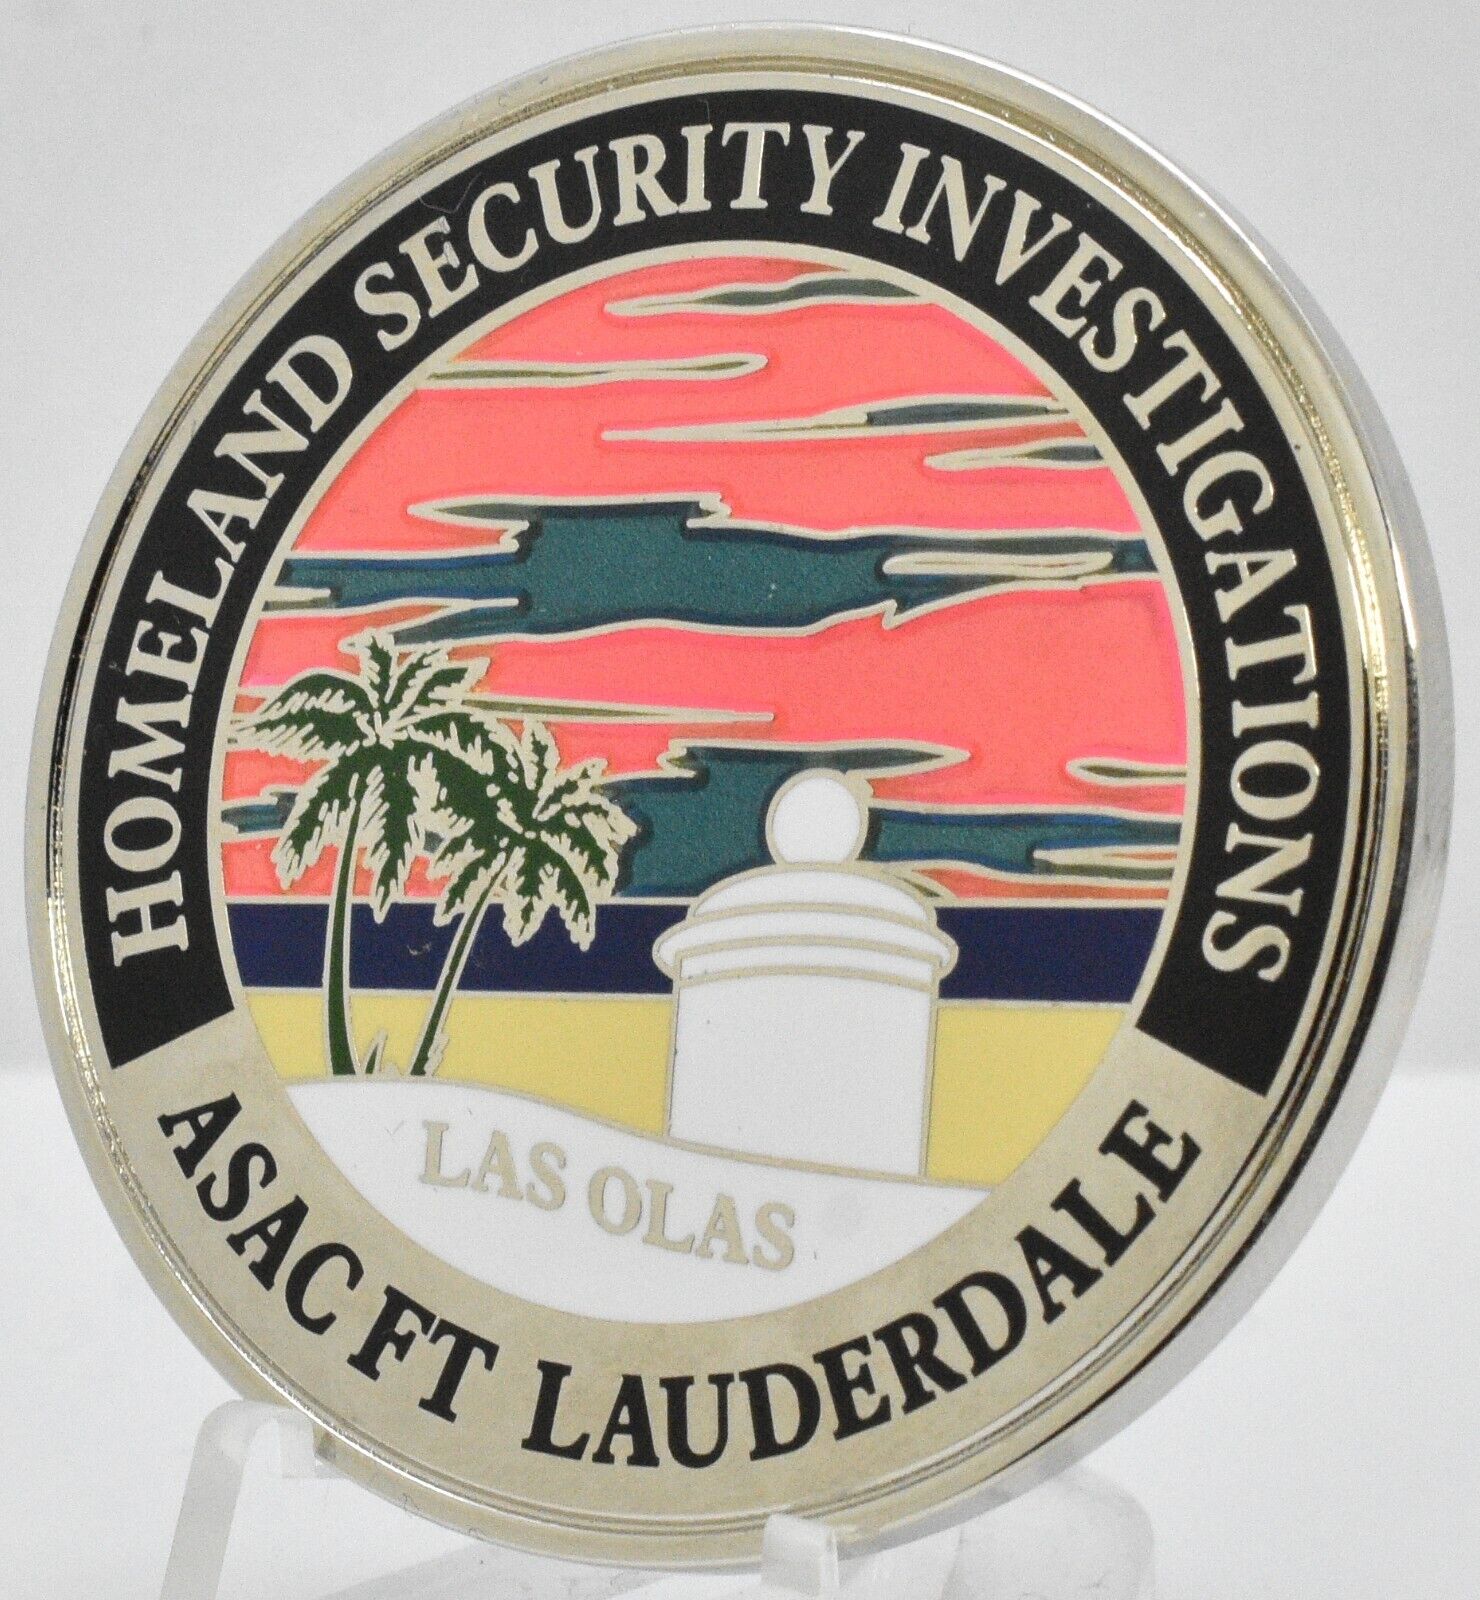 ASAC Ft Lauderdale Florida Homeland Sec Special Agent Challenge Coin